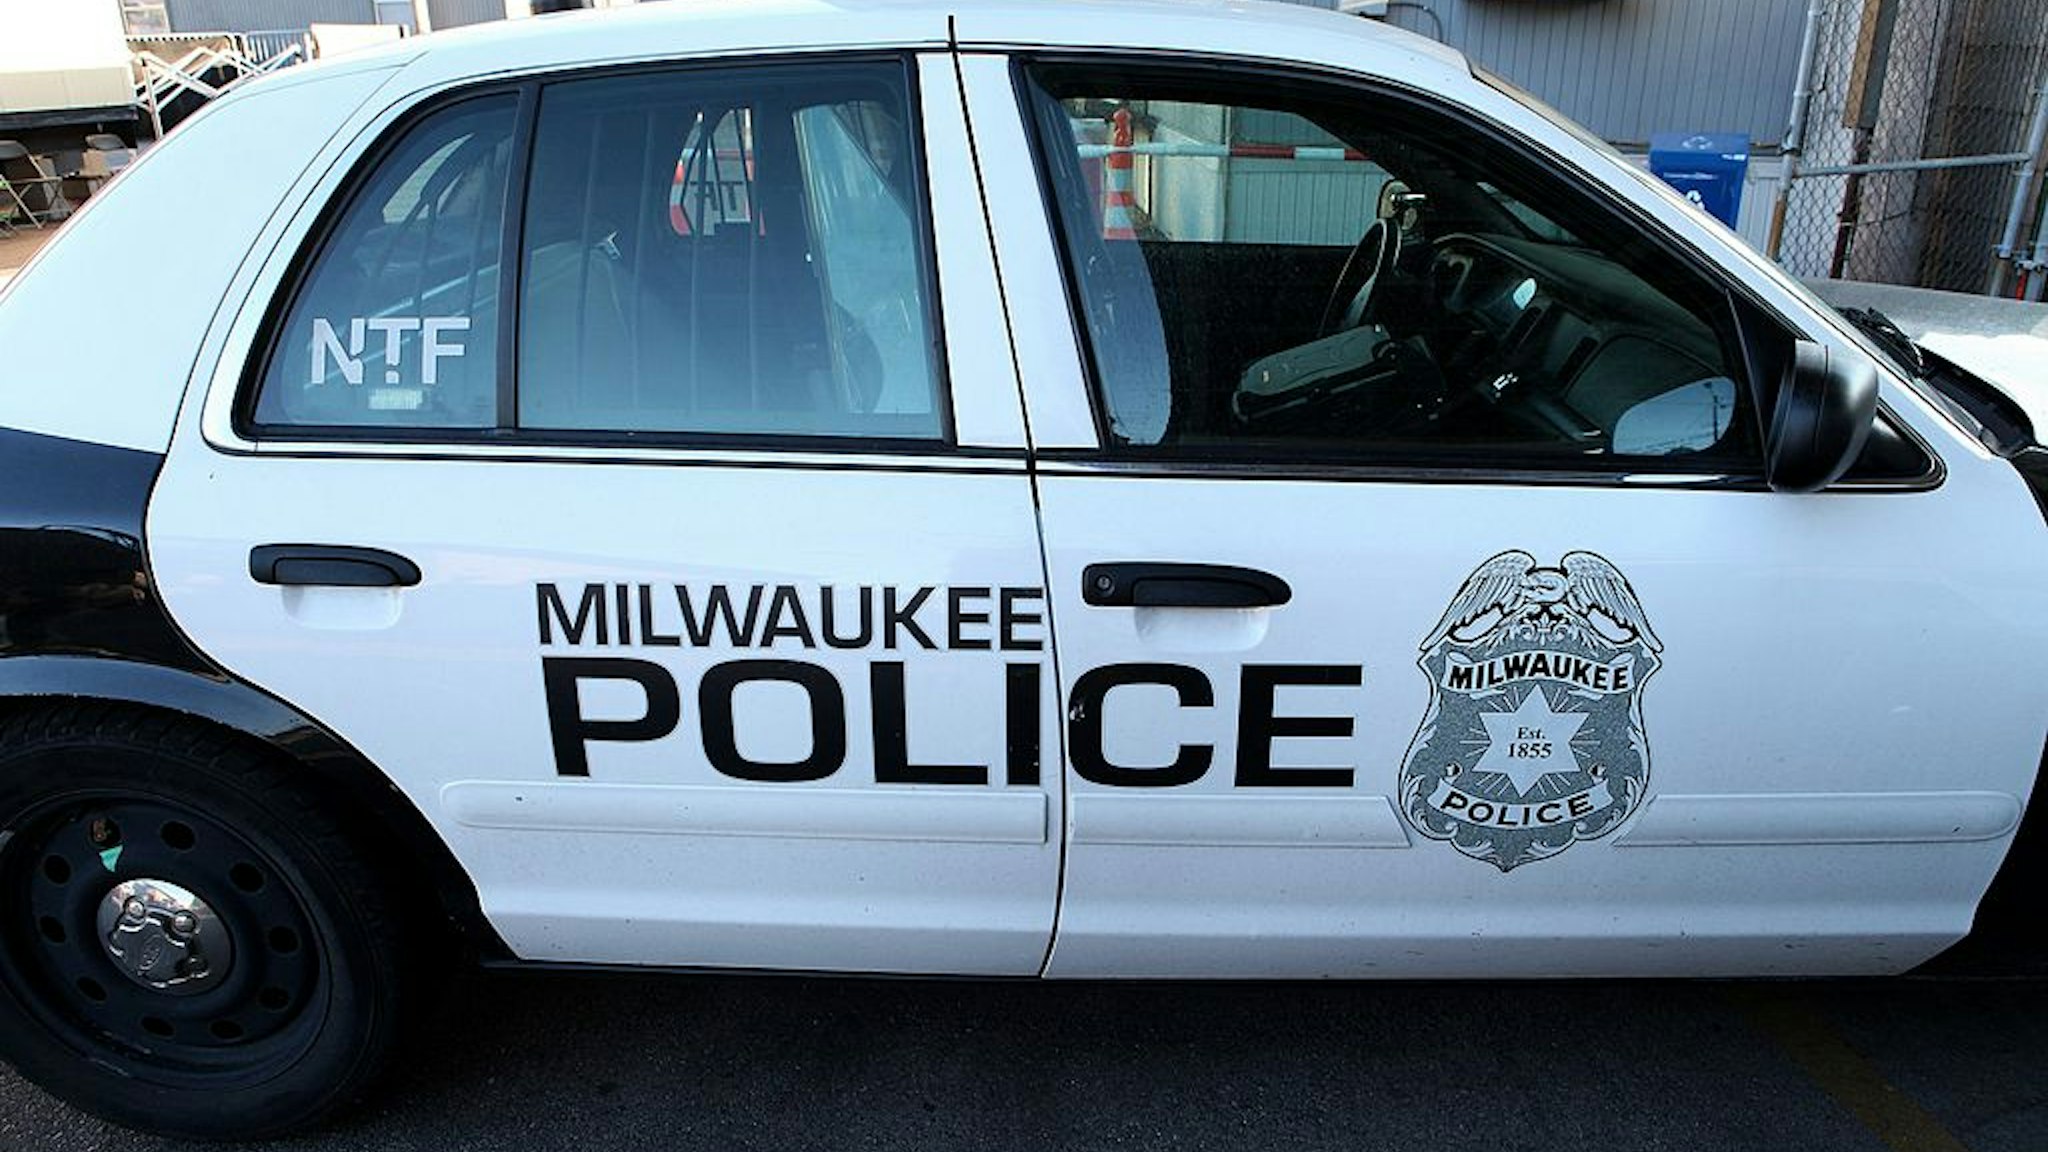 A Milwaukee Police Car, sits parked at the Henry W. Maier Festival Park(Summerfest Grounds) in Milwaukee, Wisconsin on AUGUST 30, 2013.